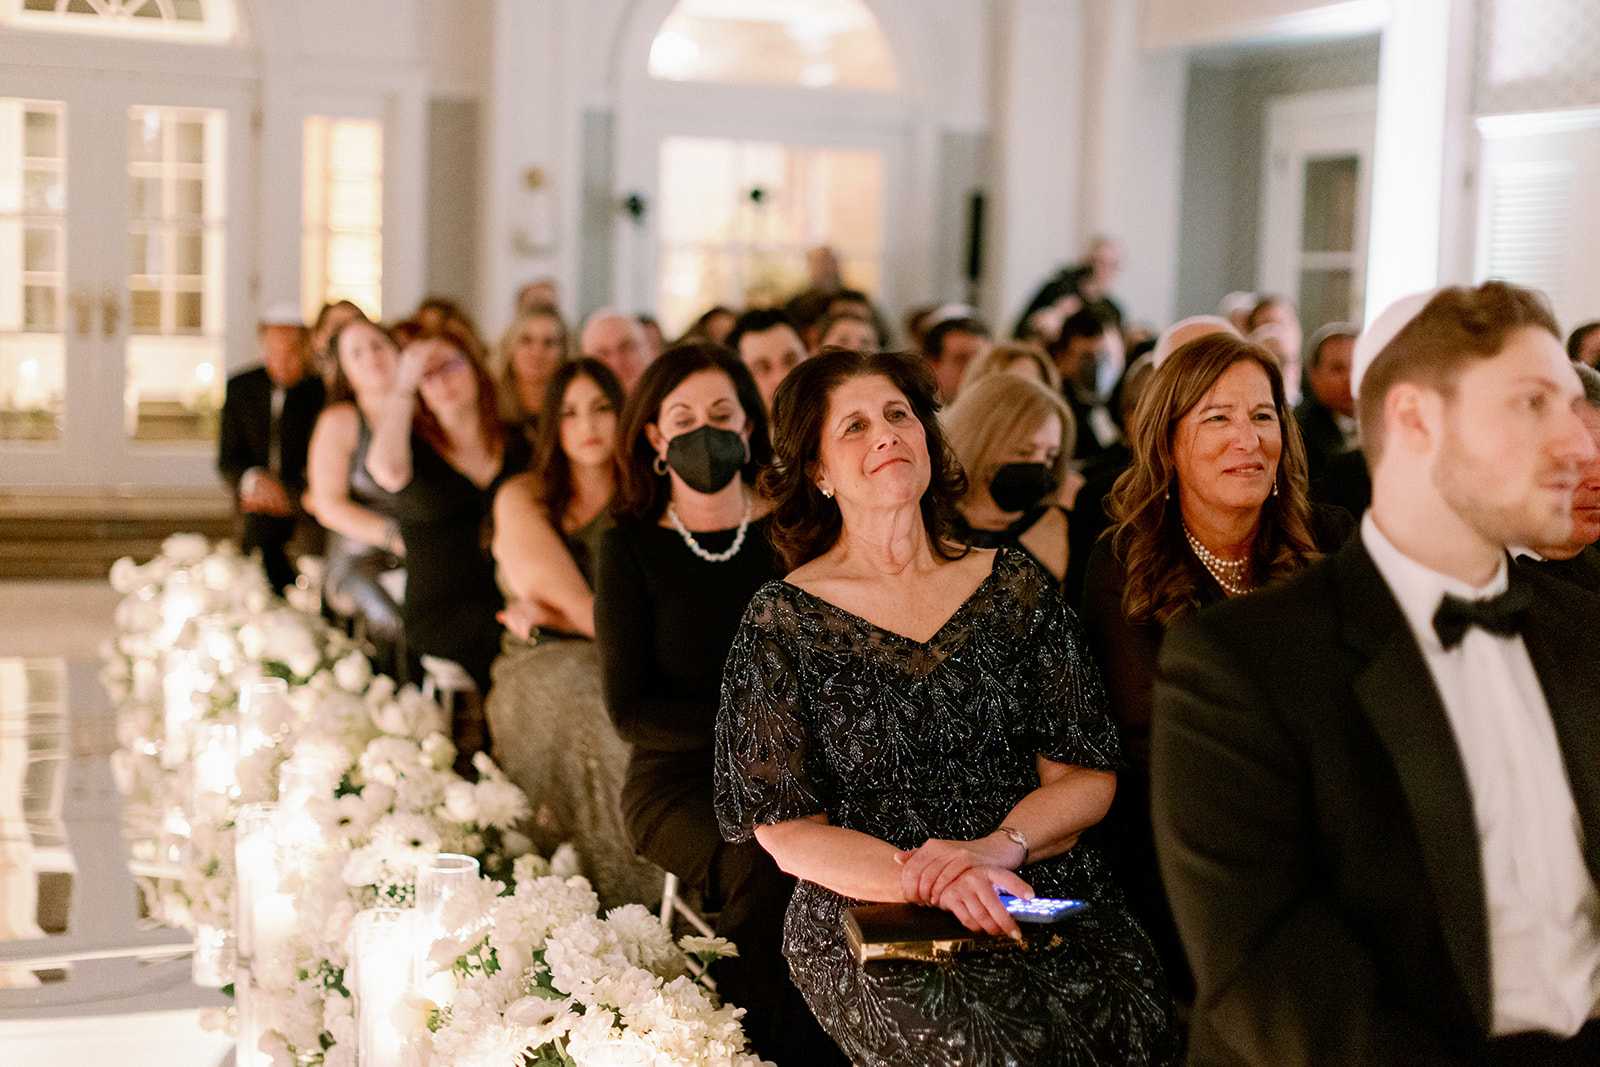 Wedding guests get emotional while watching the ceremony.